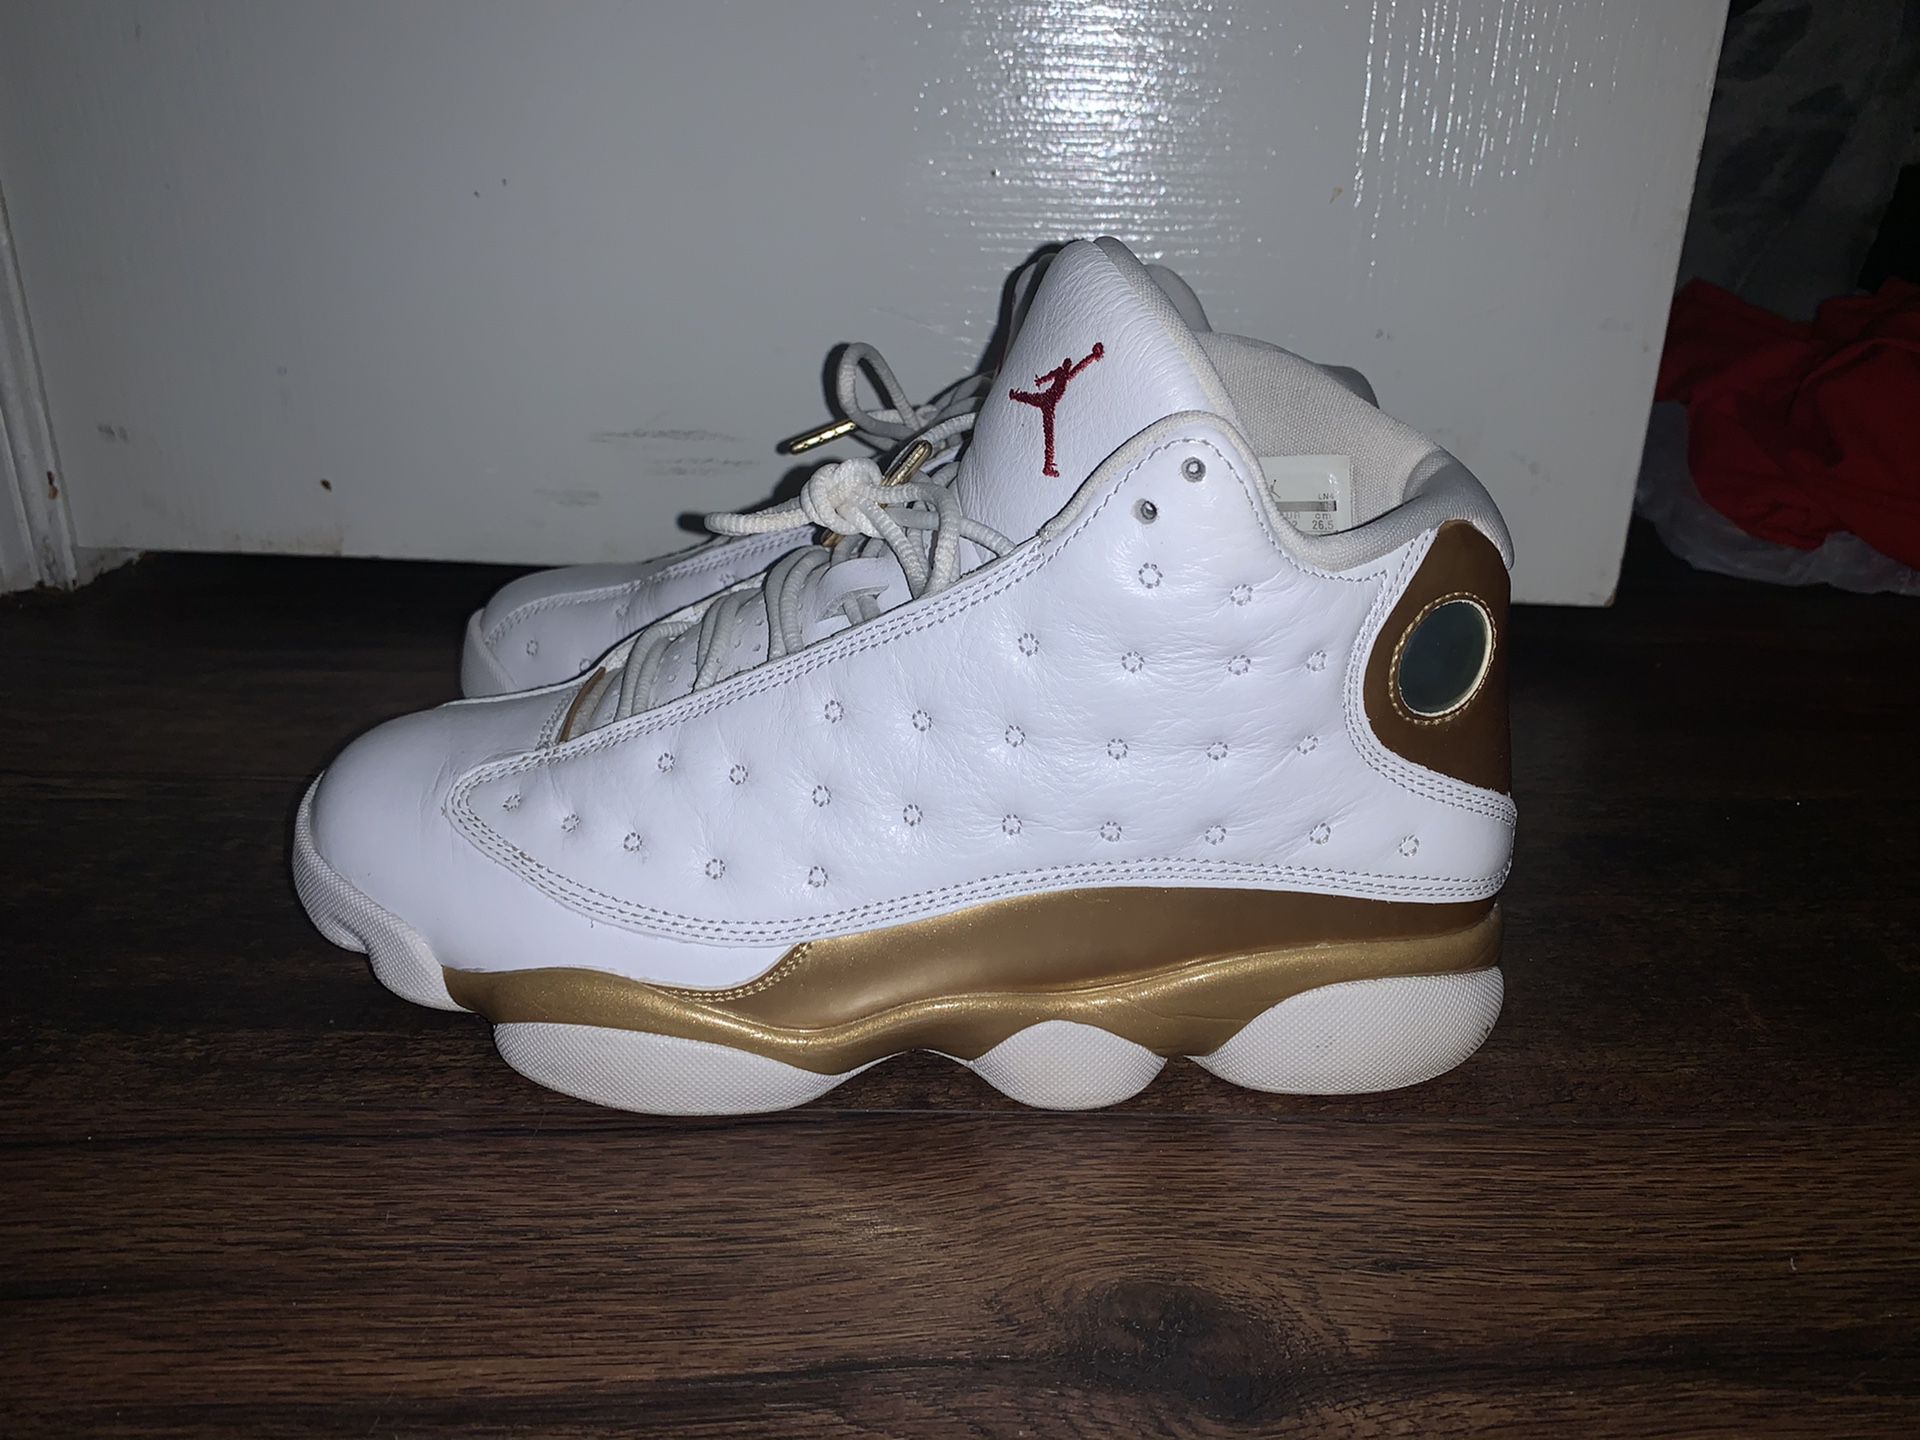 Air Jordan 13 dmp pack for sale!!! (Only the 13s) size 8.5